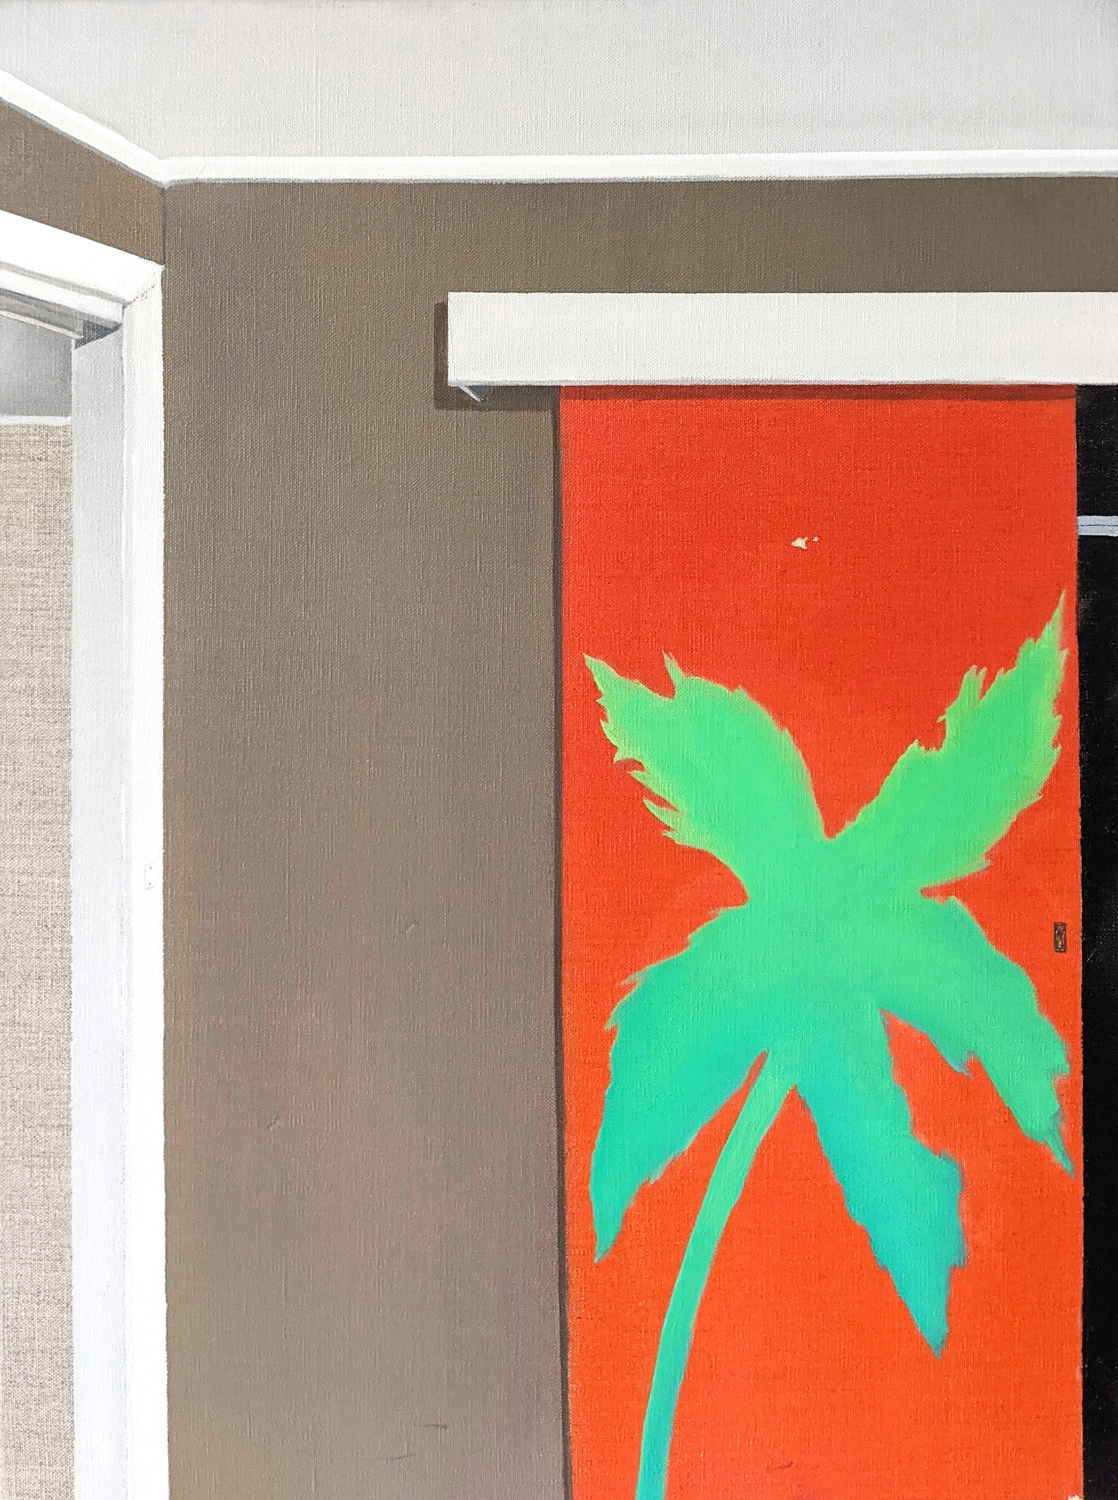 An oil painting of a red and orange gradient placed onto what appears to be a door with a glowing gradient green palm tree.